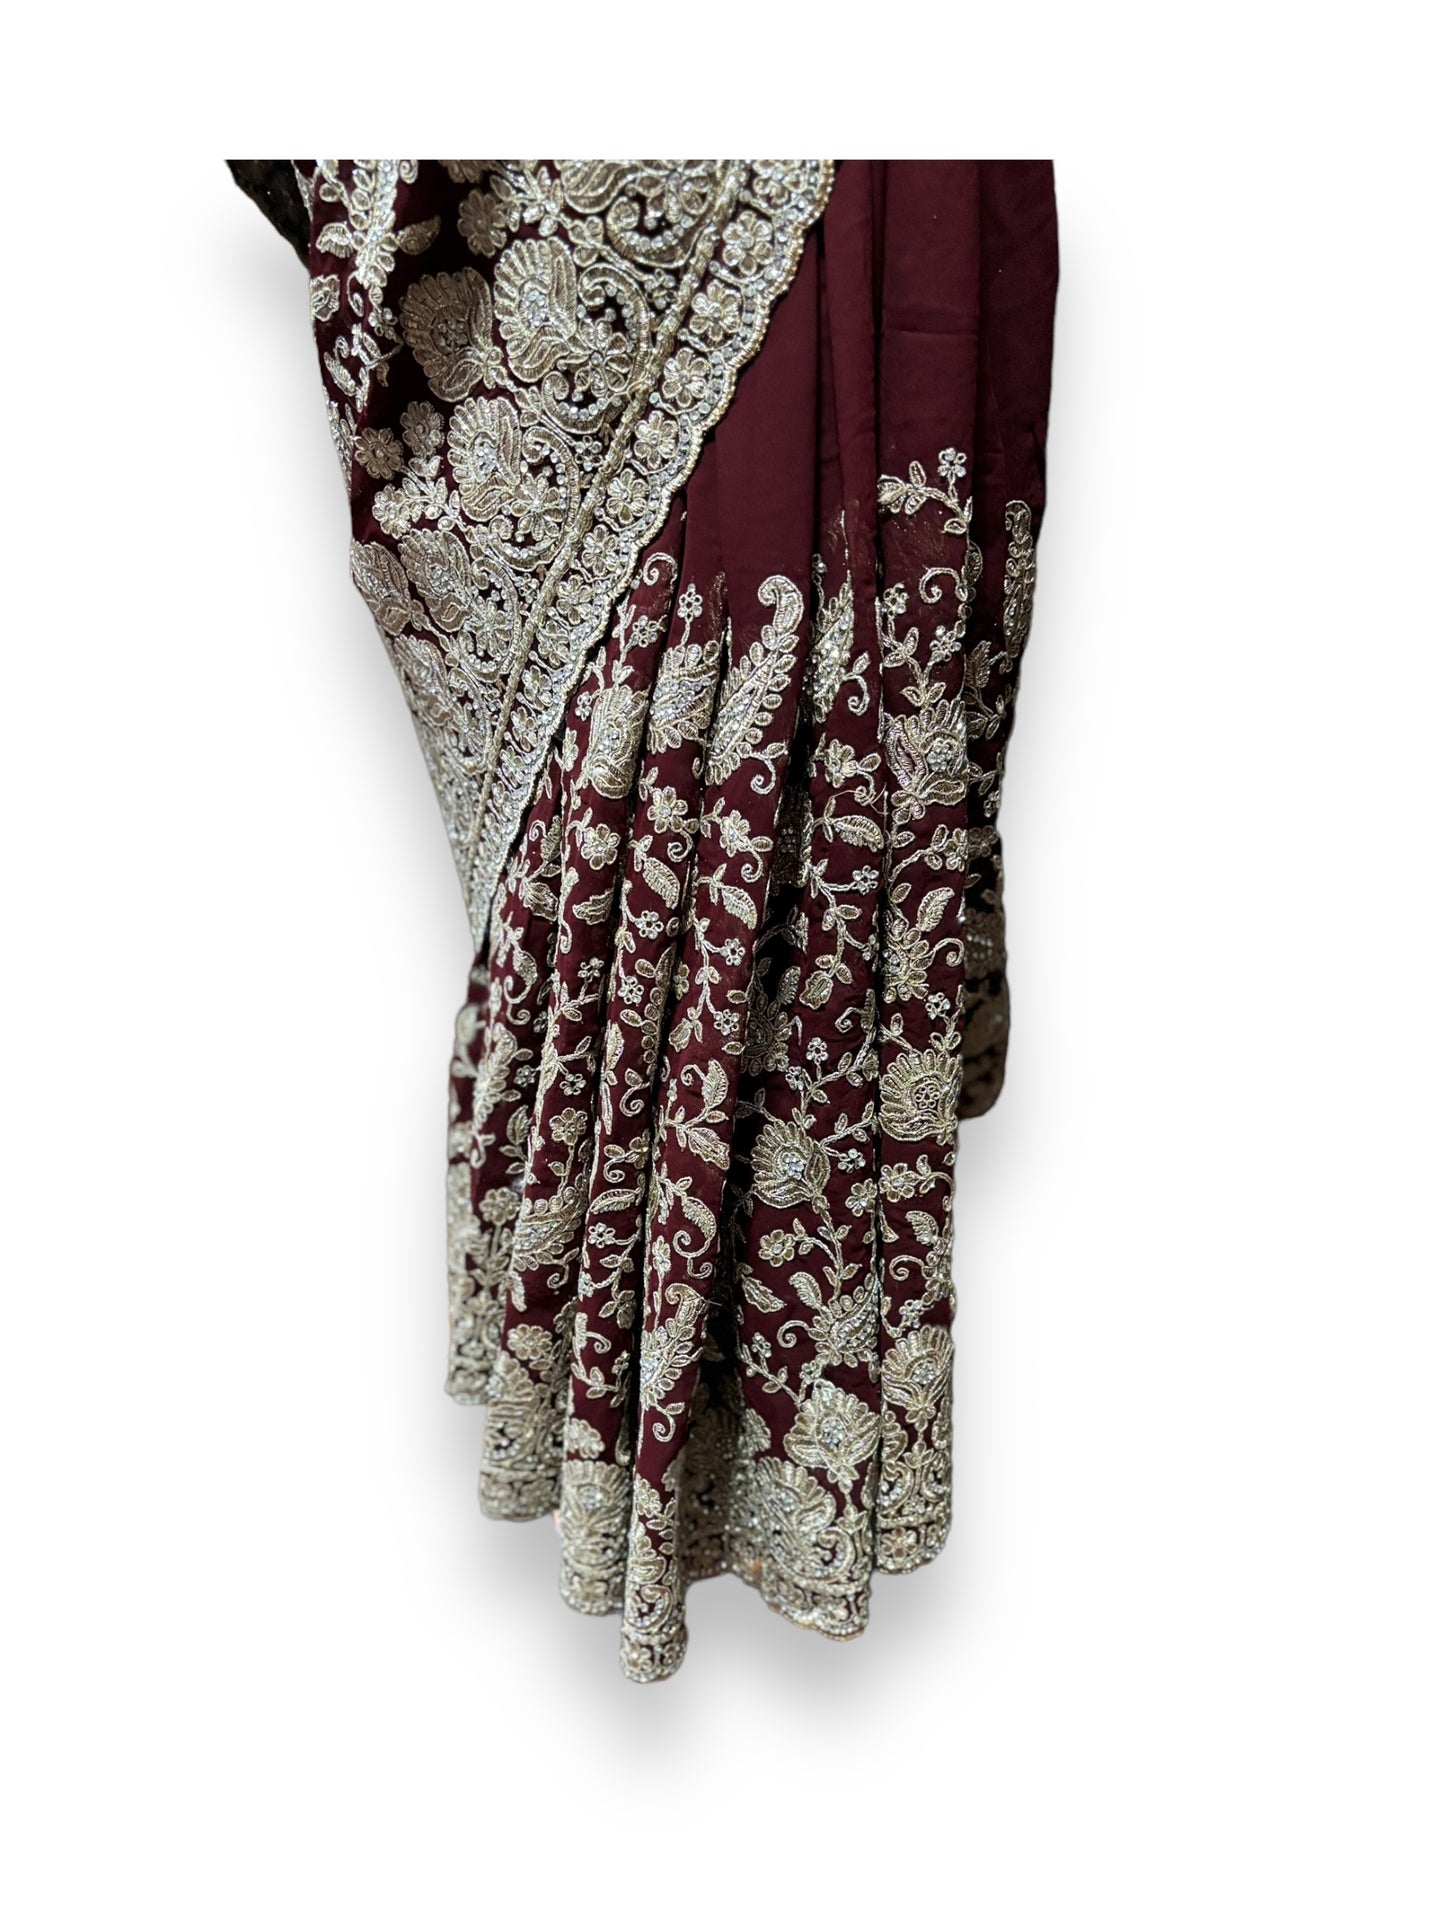 All Over Work Party Wear Traditional Designer Saree